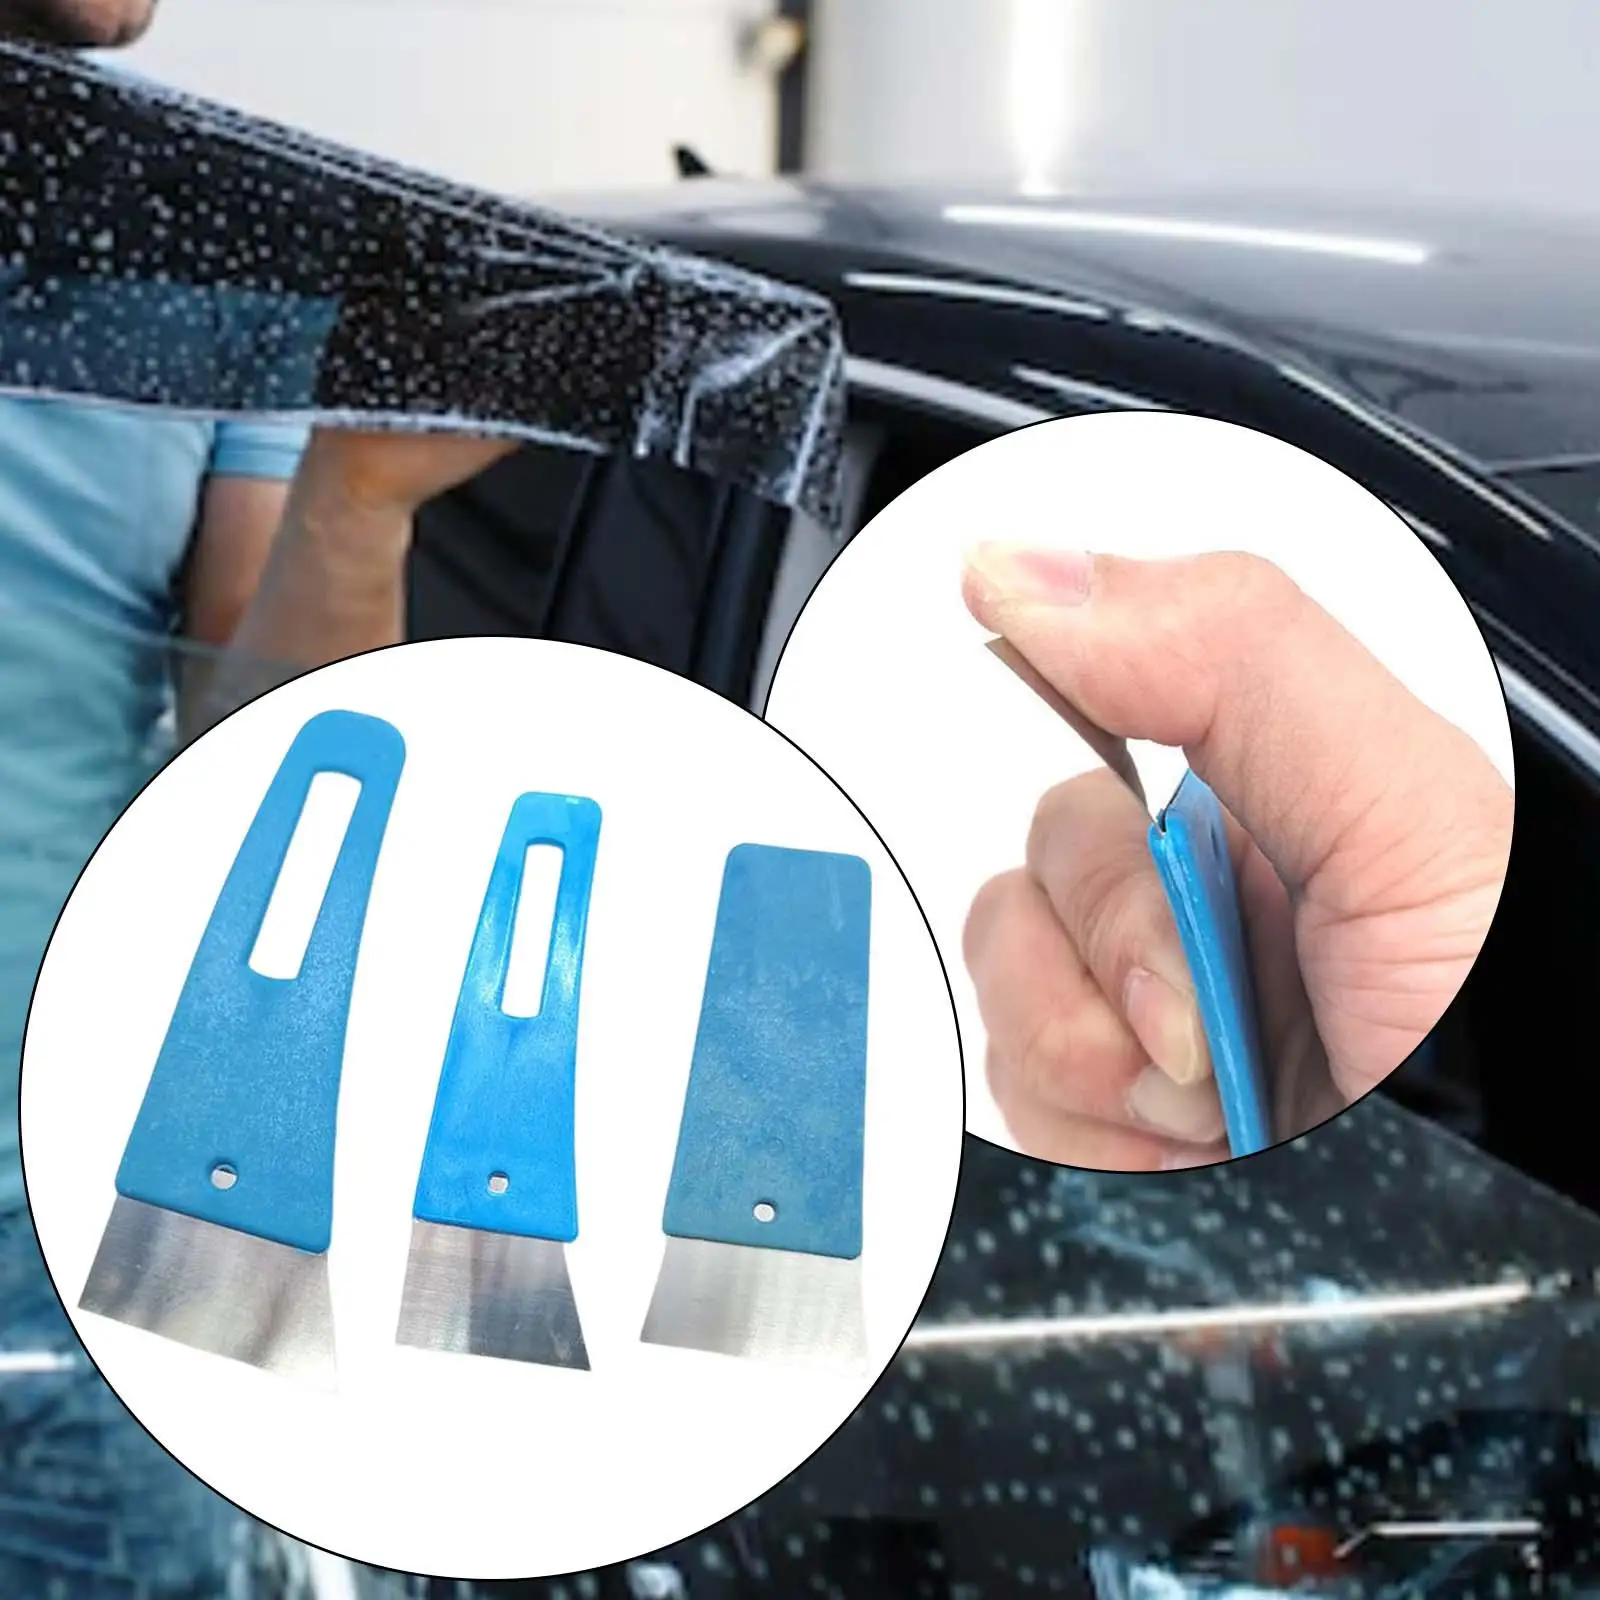 3 Pieces Car Window Film Scraper Squeegee Set Pushing Out Bubble Lines